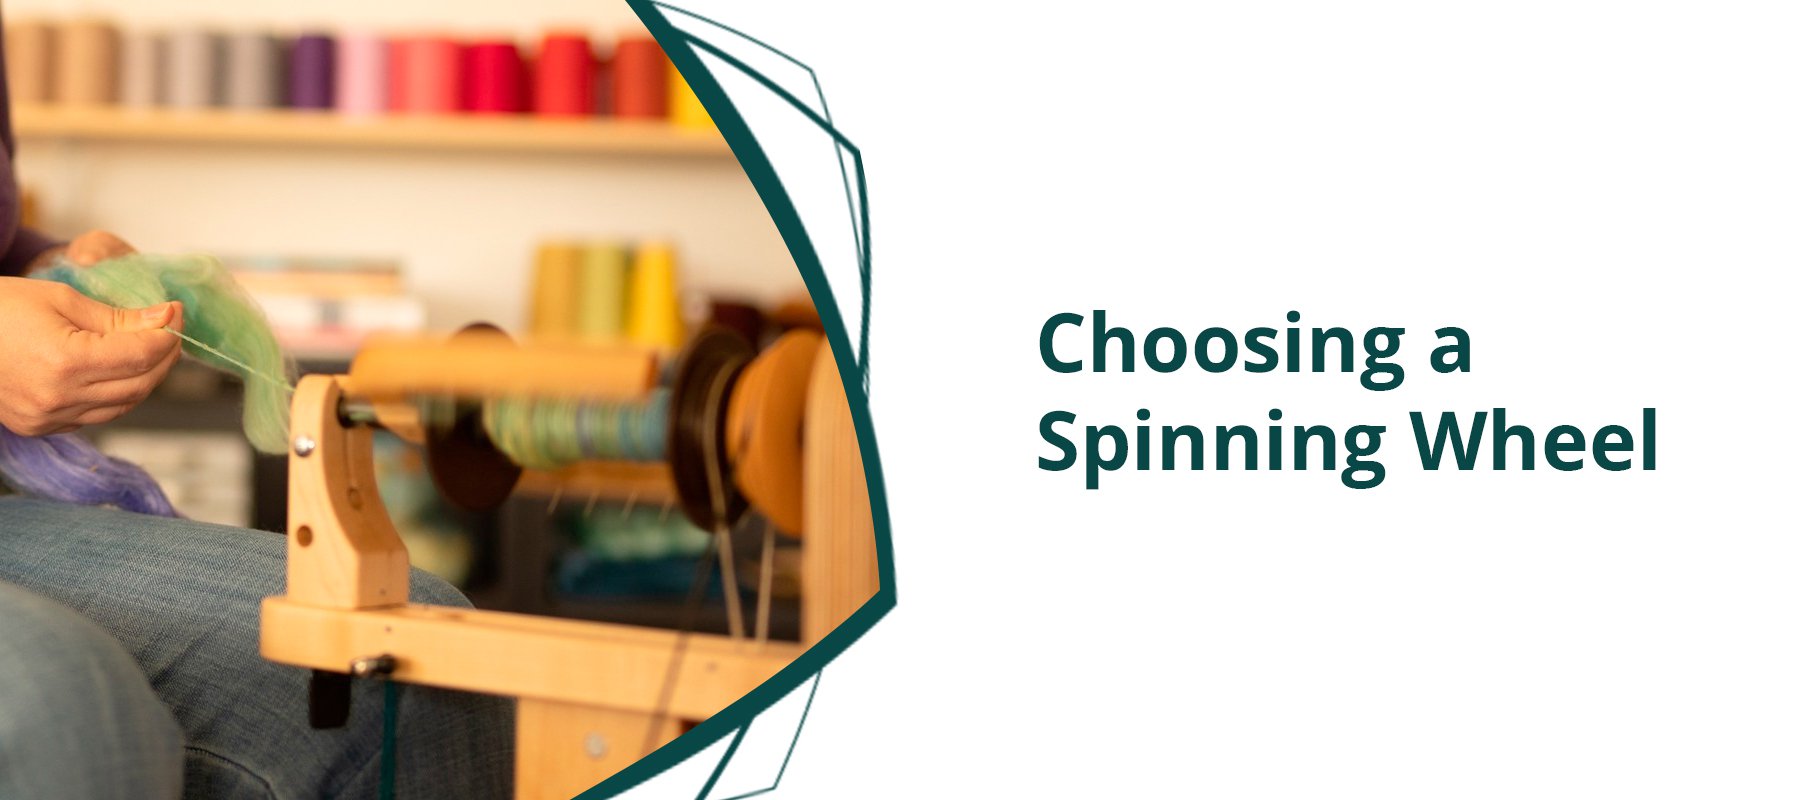 Choosing a Spinning Wheel for Your Fibre Arts Journey